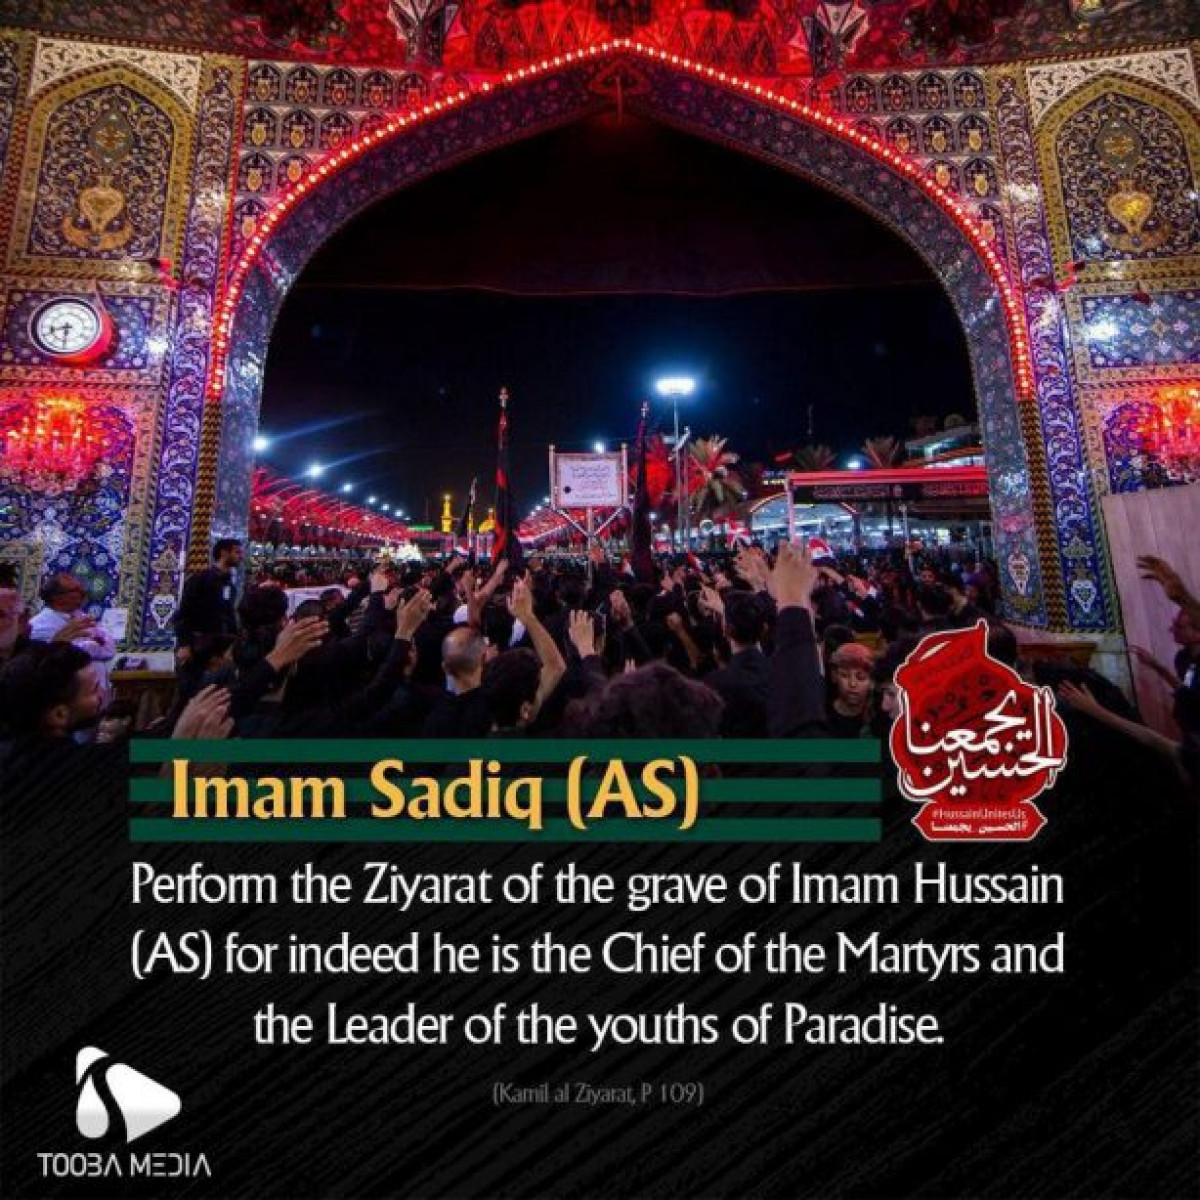 he is the Chief of the Martyrs and Leader of the youths of Paradise